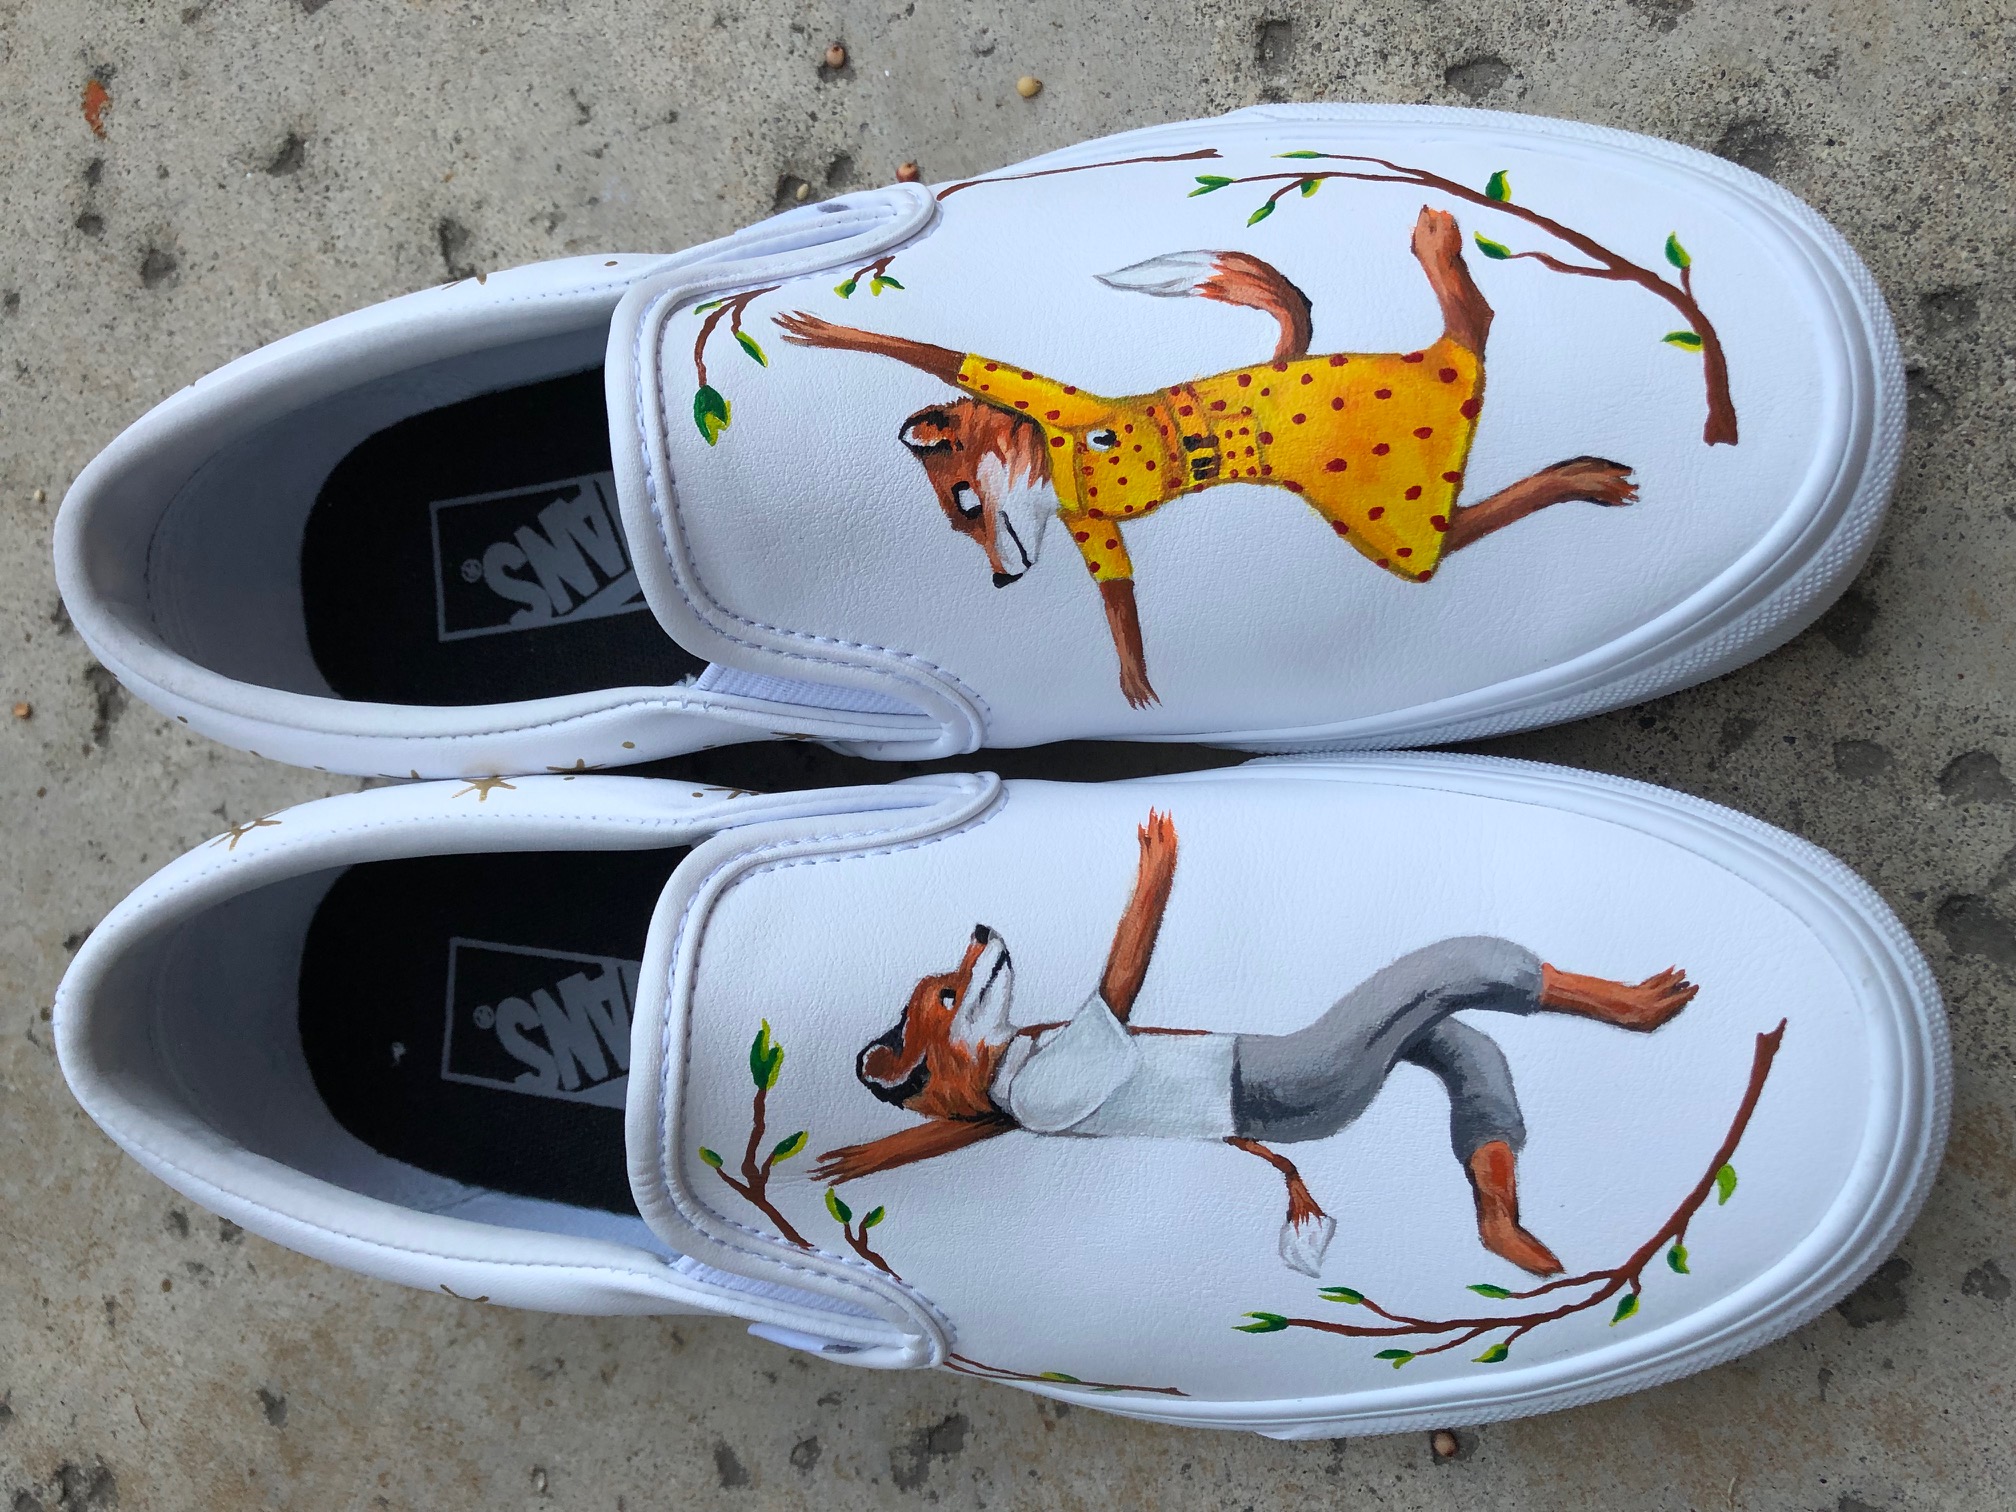 White shoes with fox designs